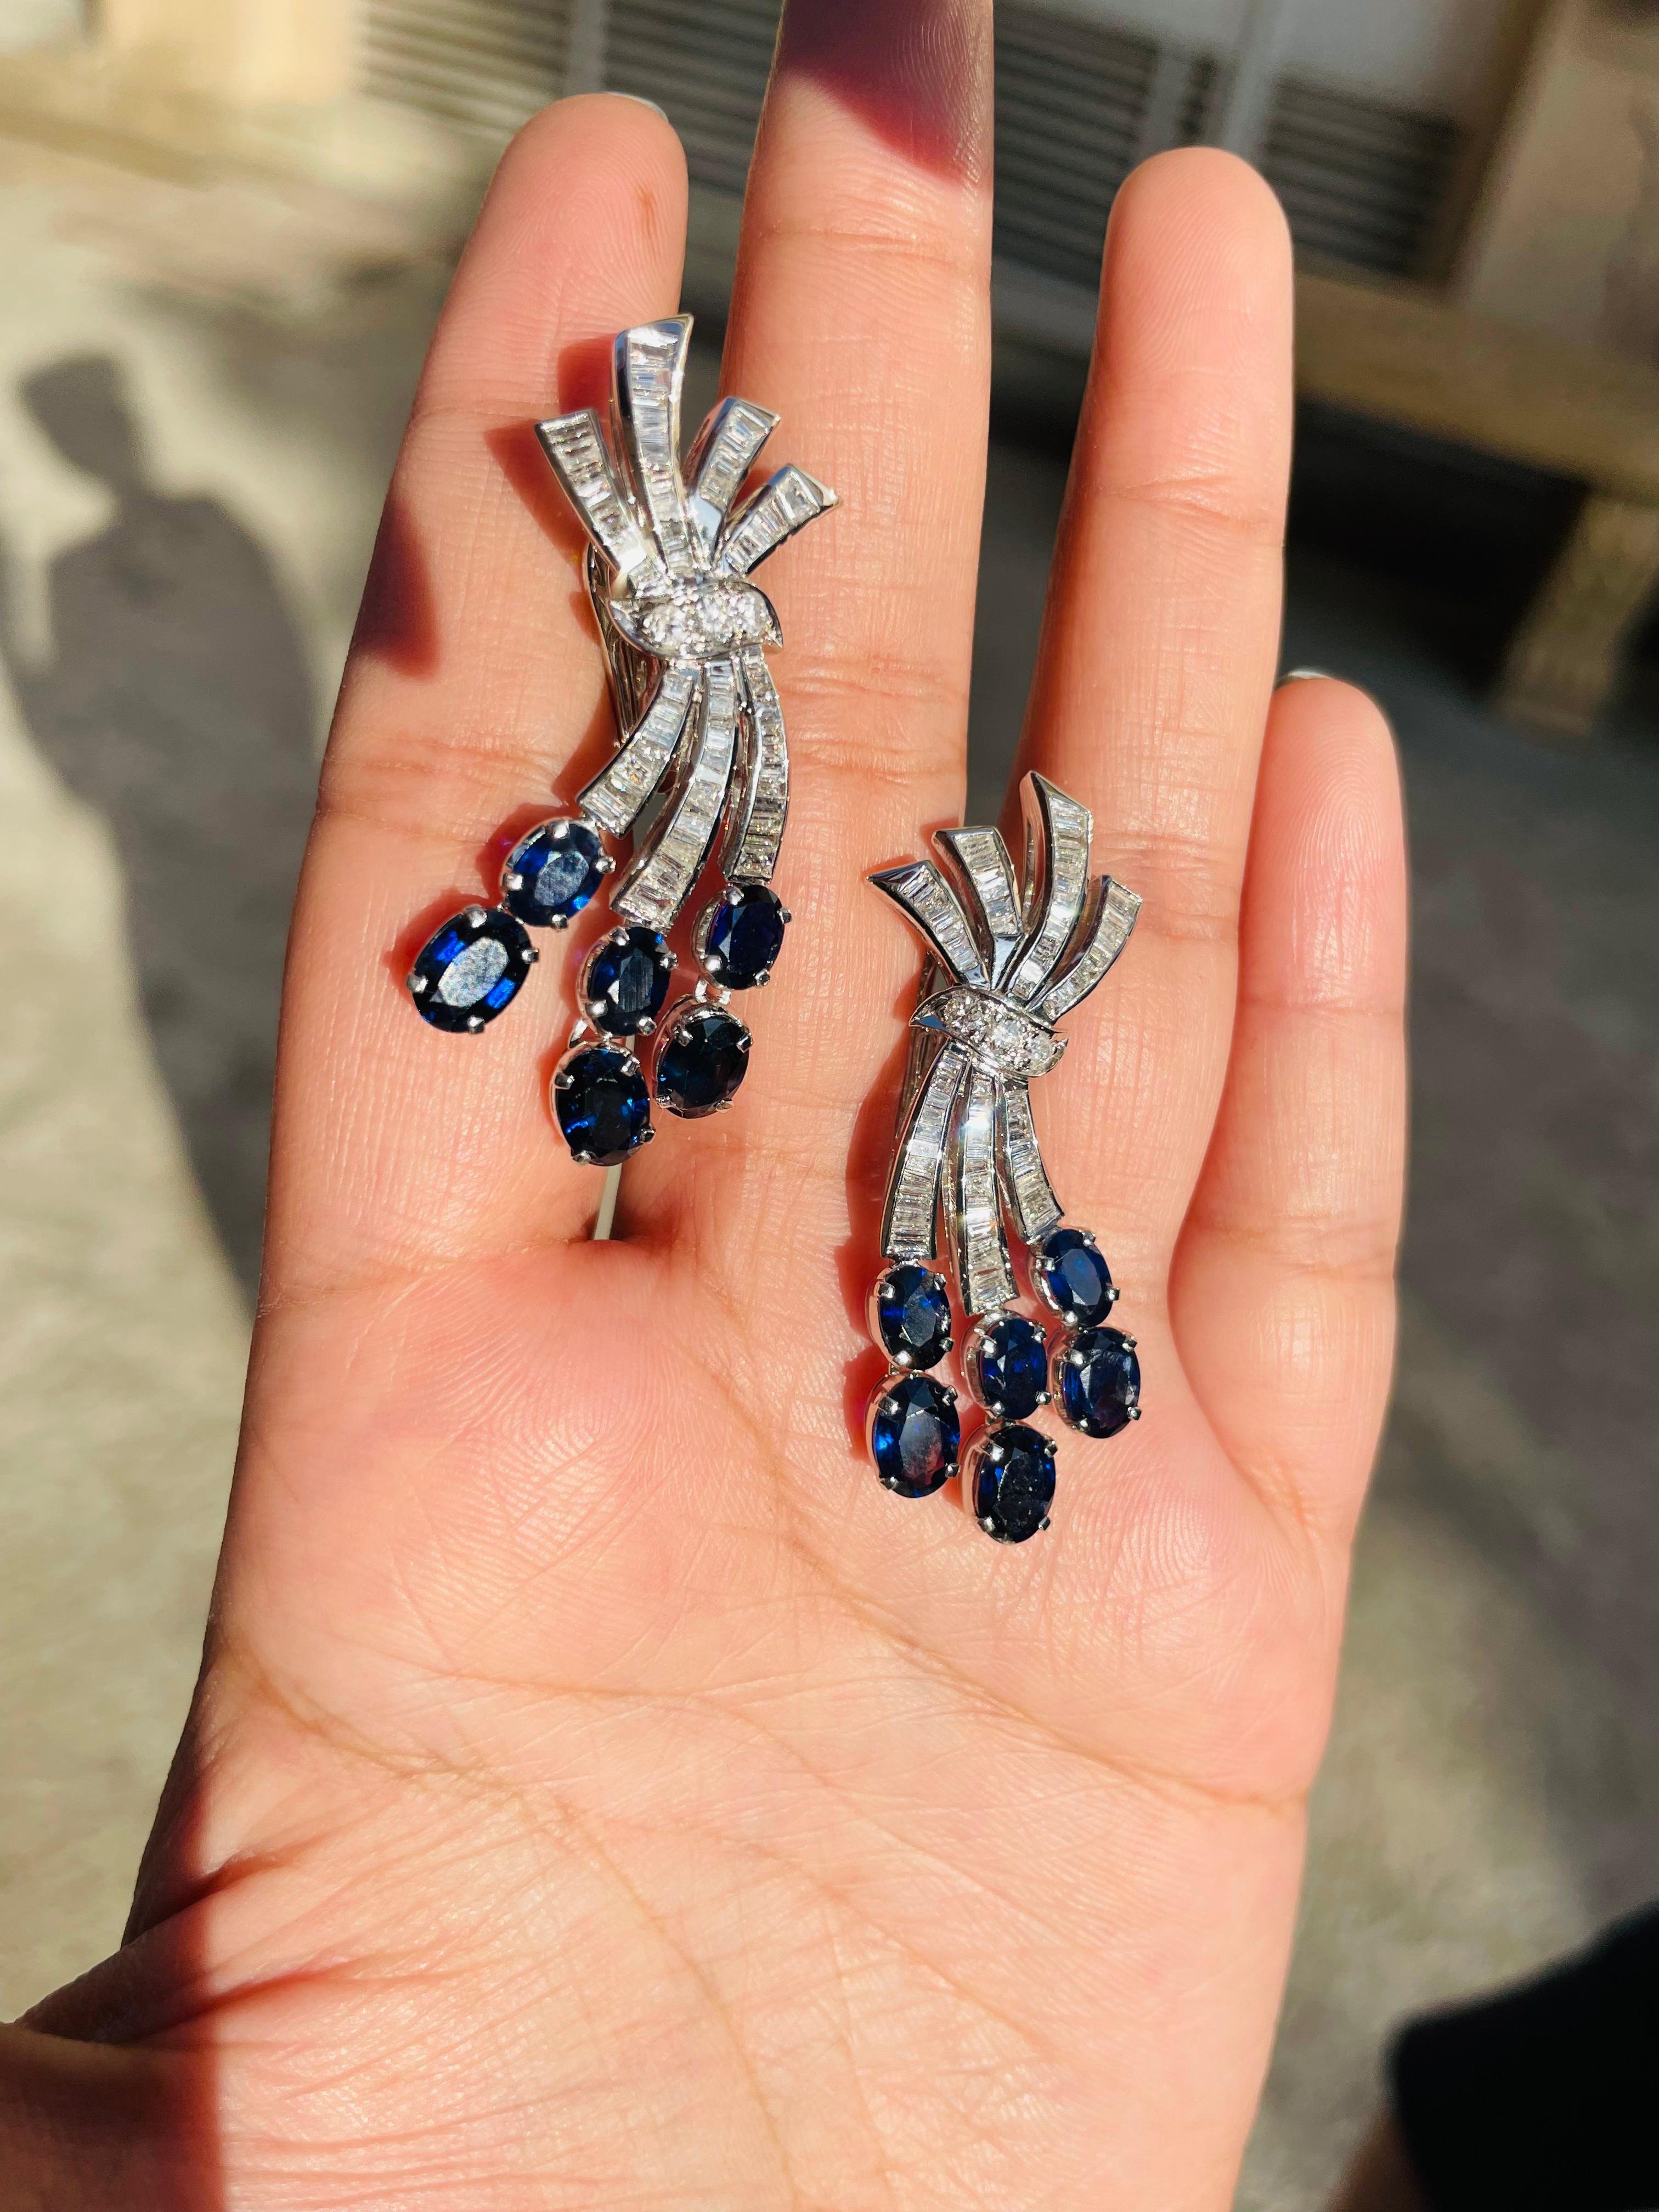 Blue Sapphire Dangle earrings to make a statement with your look. These earrings create a sparkling, luxurious look featuring oval cut gemstone.
If you love to gravitate towards unique styles, this piece of jewelry is perfect for you.

PRODUCT